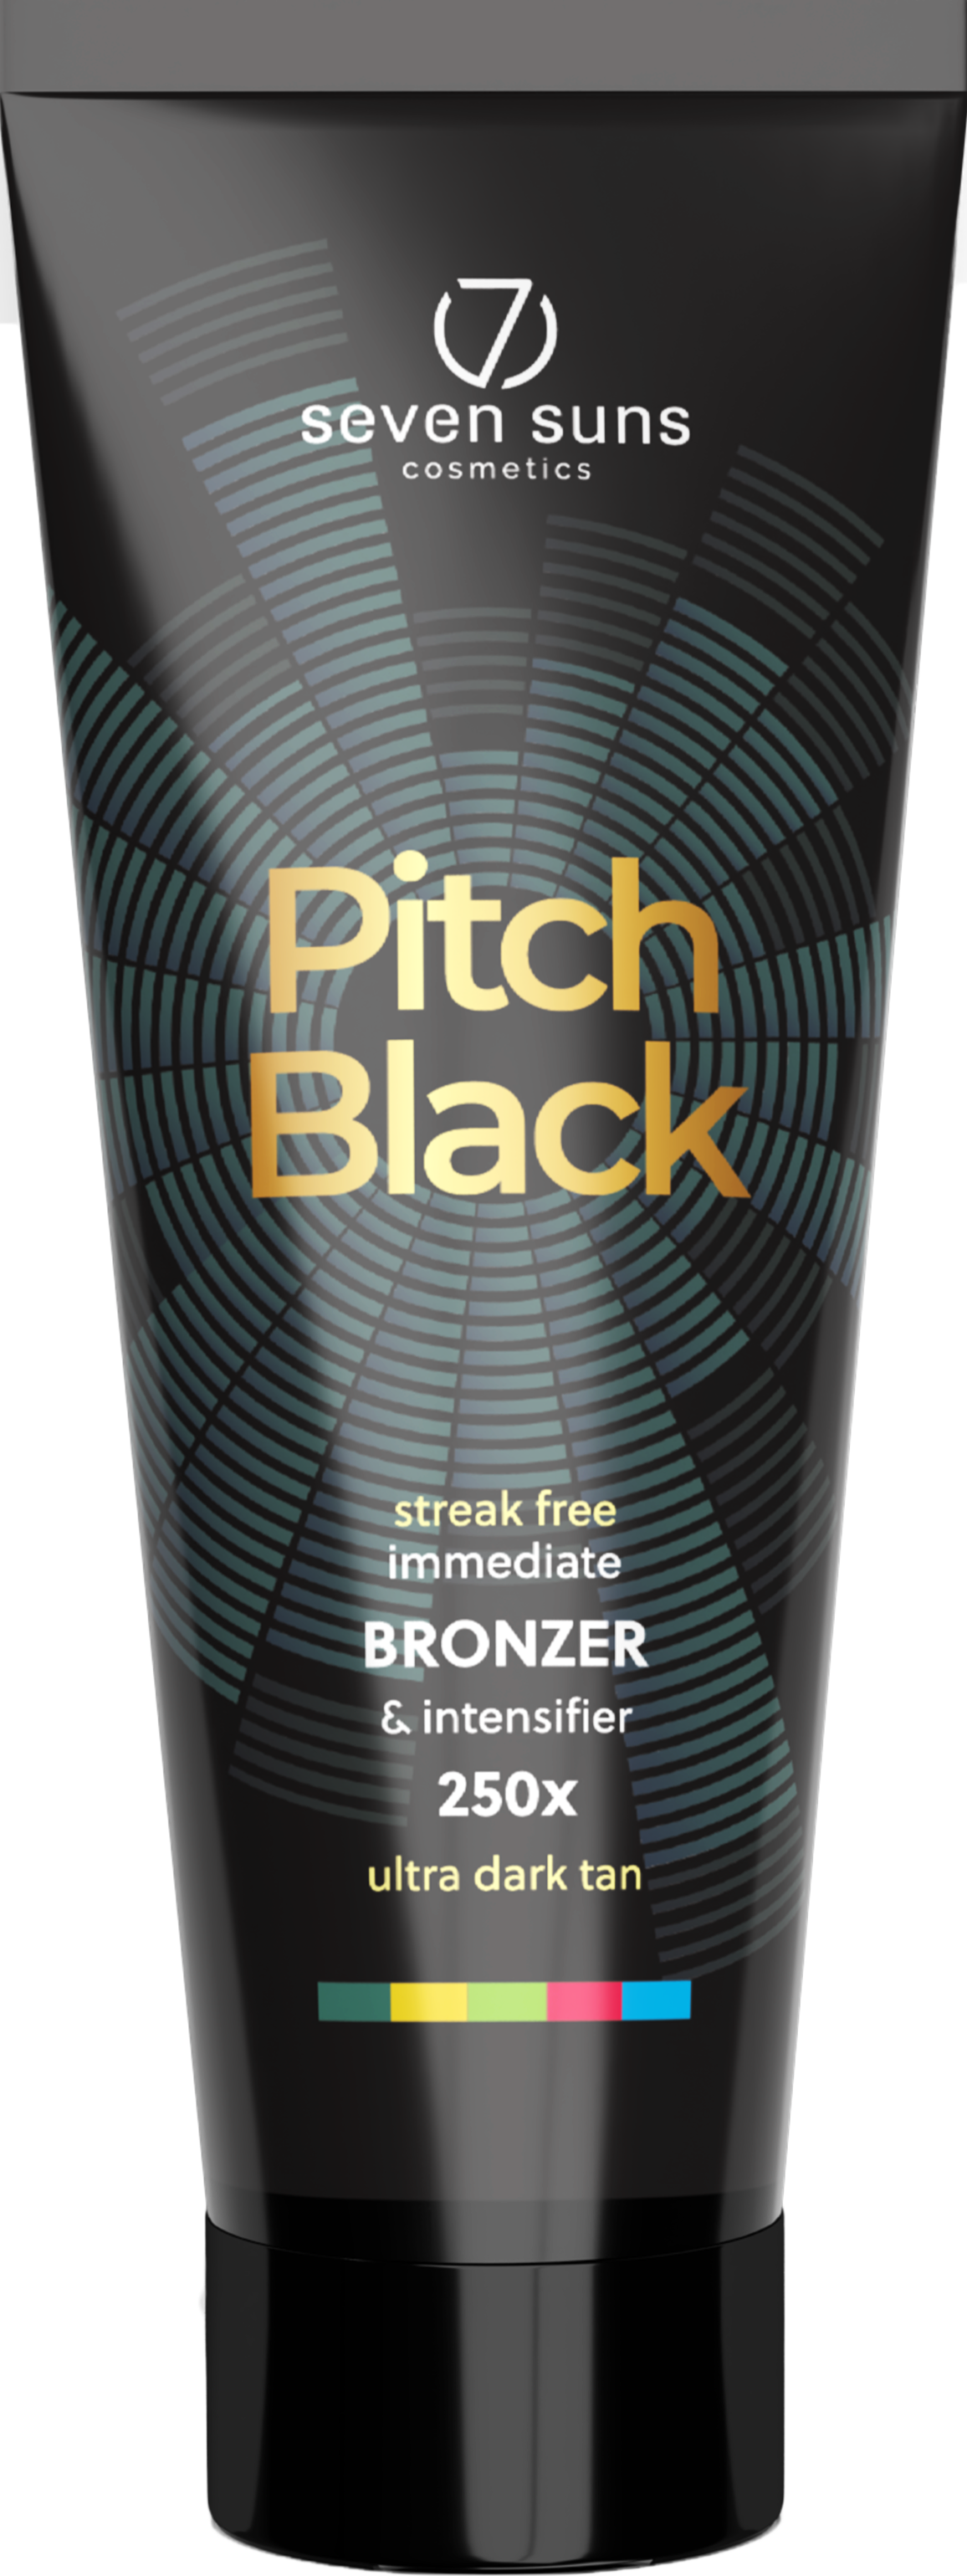 Pitch Black Coloured